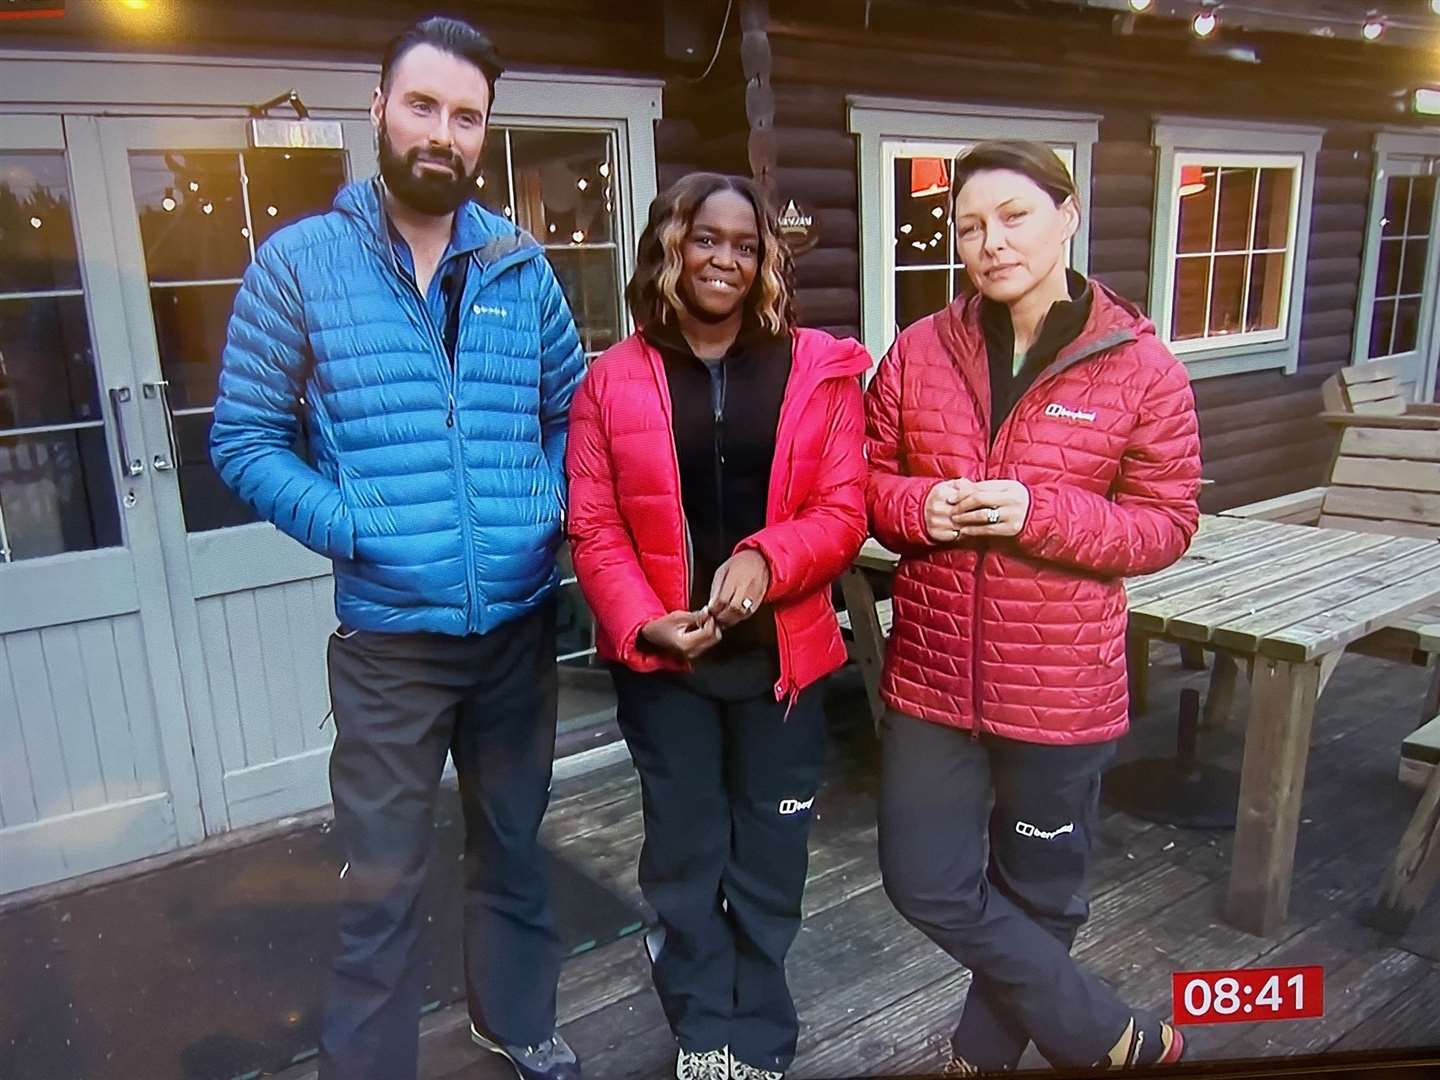 Celebrities Rylan, Oti Mabuse and Emma Willis talking about their winter mountain training at The Woodshed on BBC Breakfast.